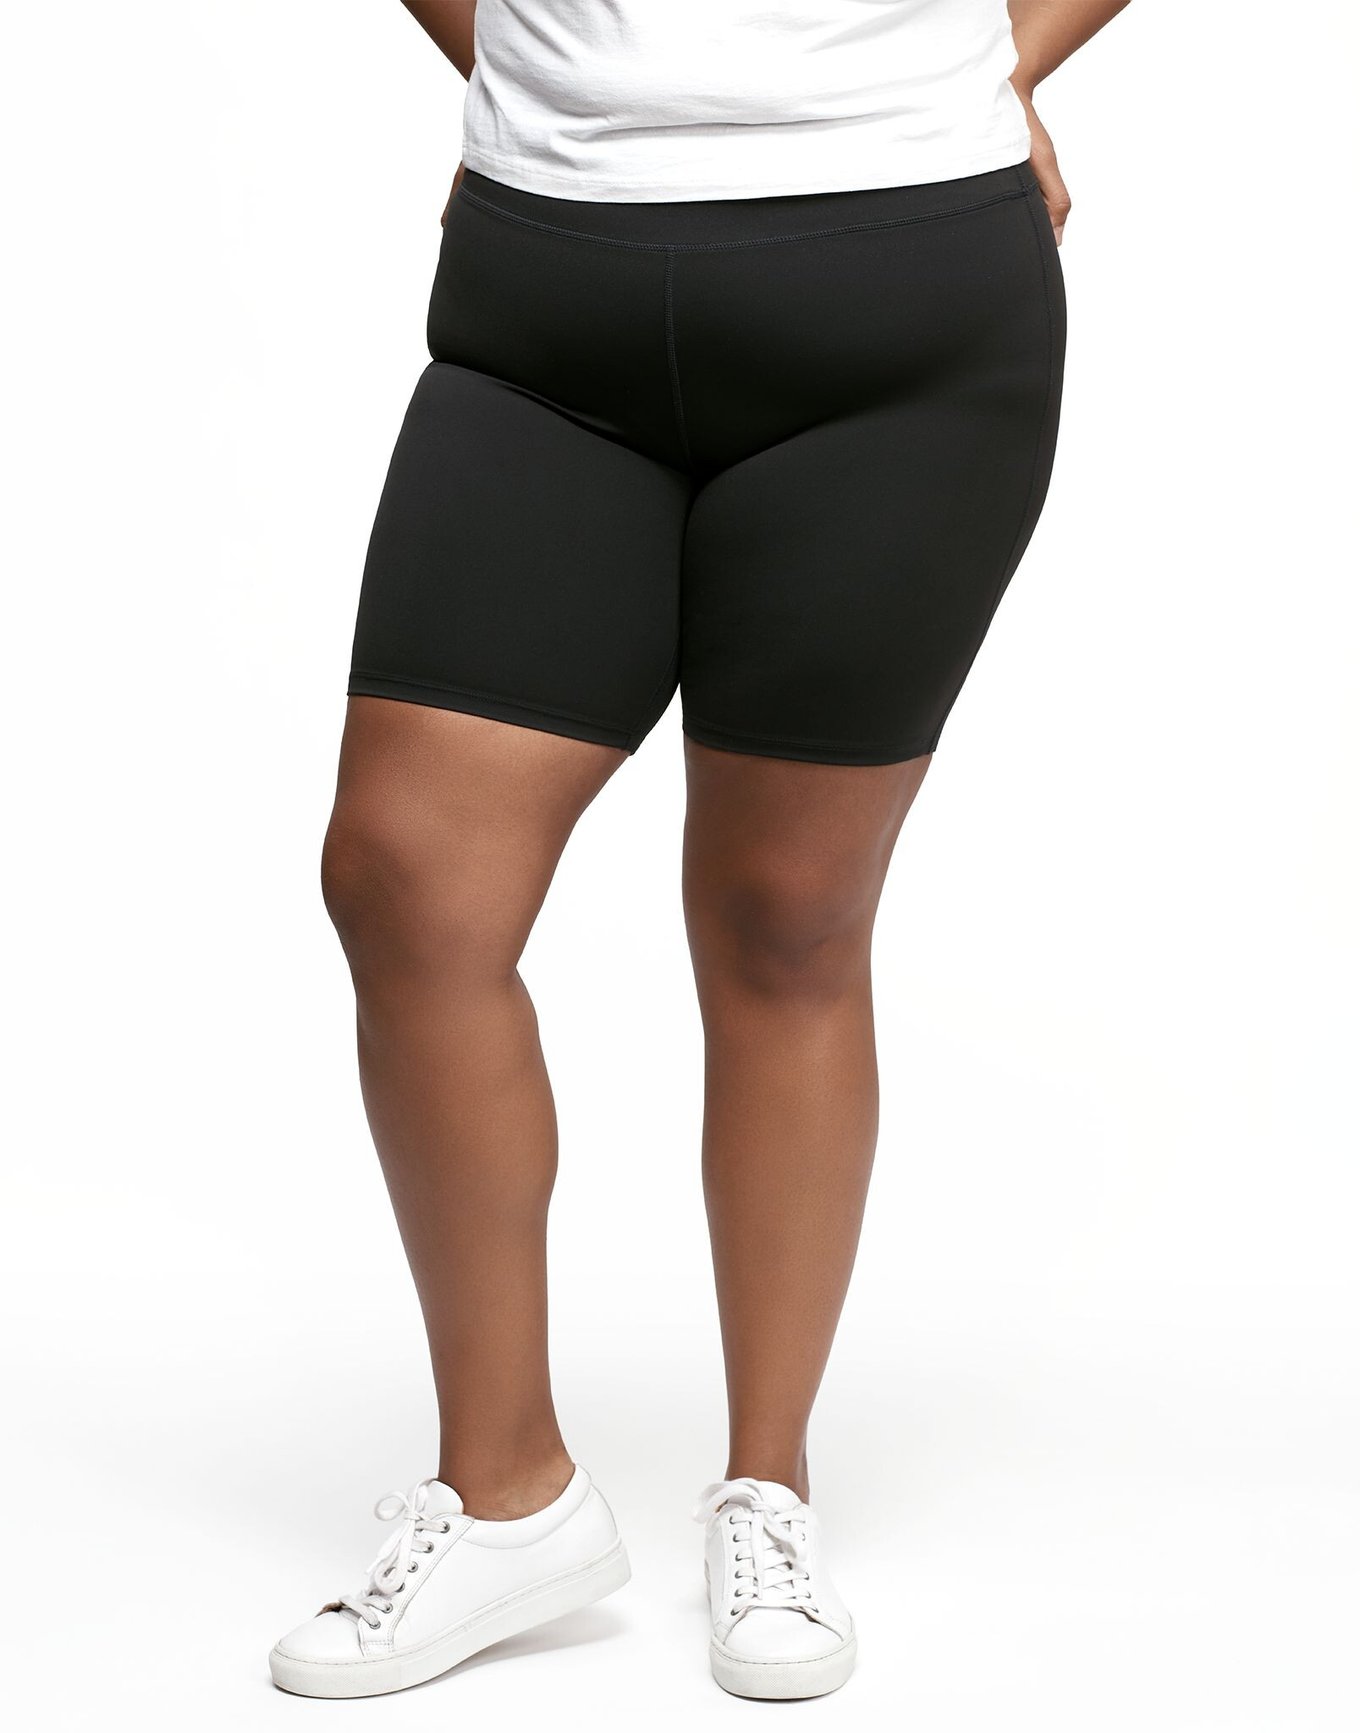 White Matte Solid Spandex High Waist Booty Shorts. Cheeky and Regular  Lengths. 